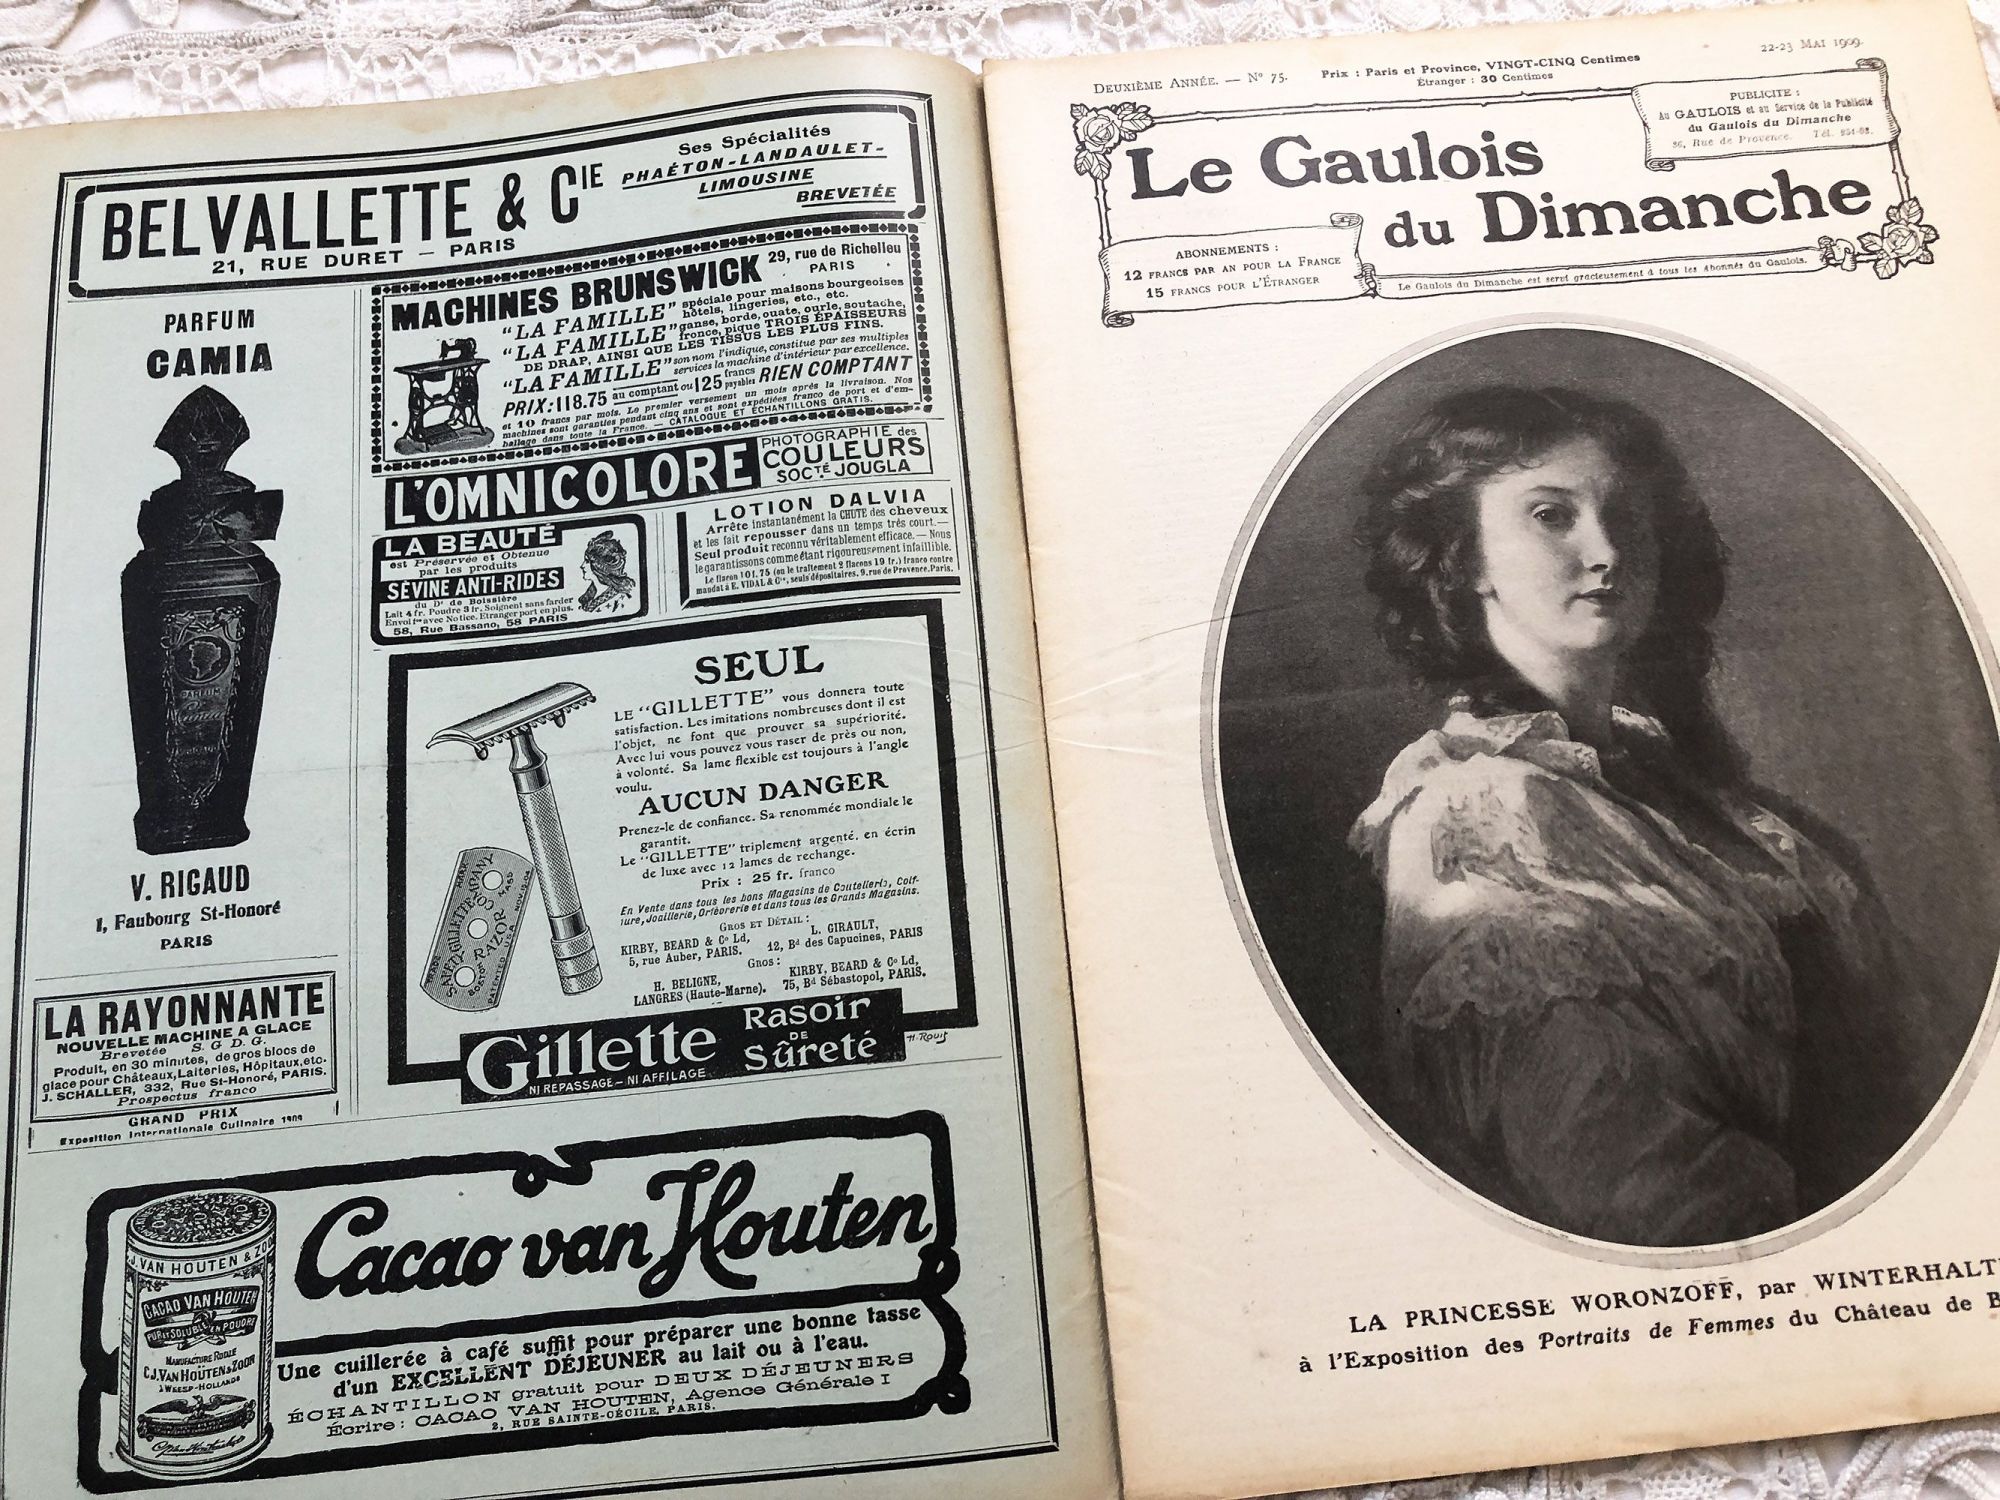 French weekly newspaper "Le Gaulois du Dimanche" of May 1909 with engravings, photos, advertising, music sheet, articles, etc.